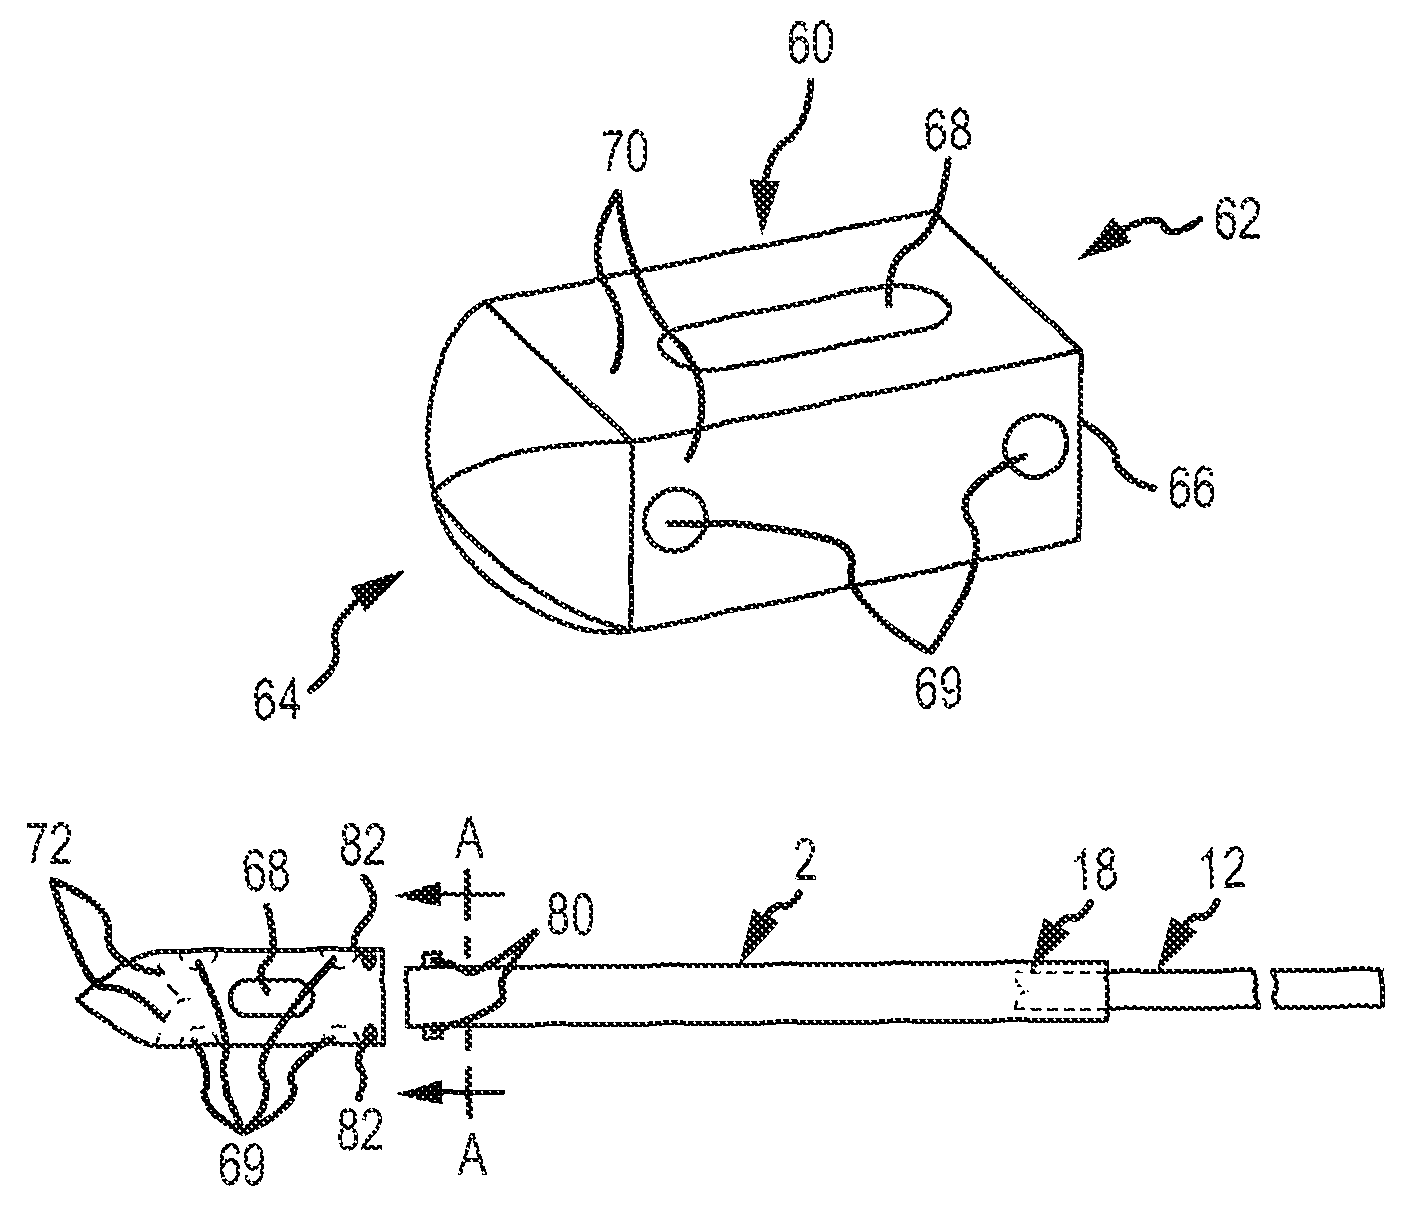 Fusion cage with combined biological delivery system